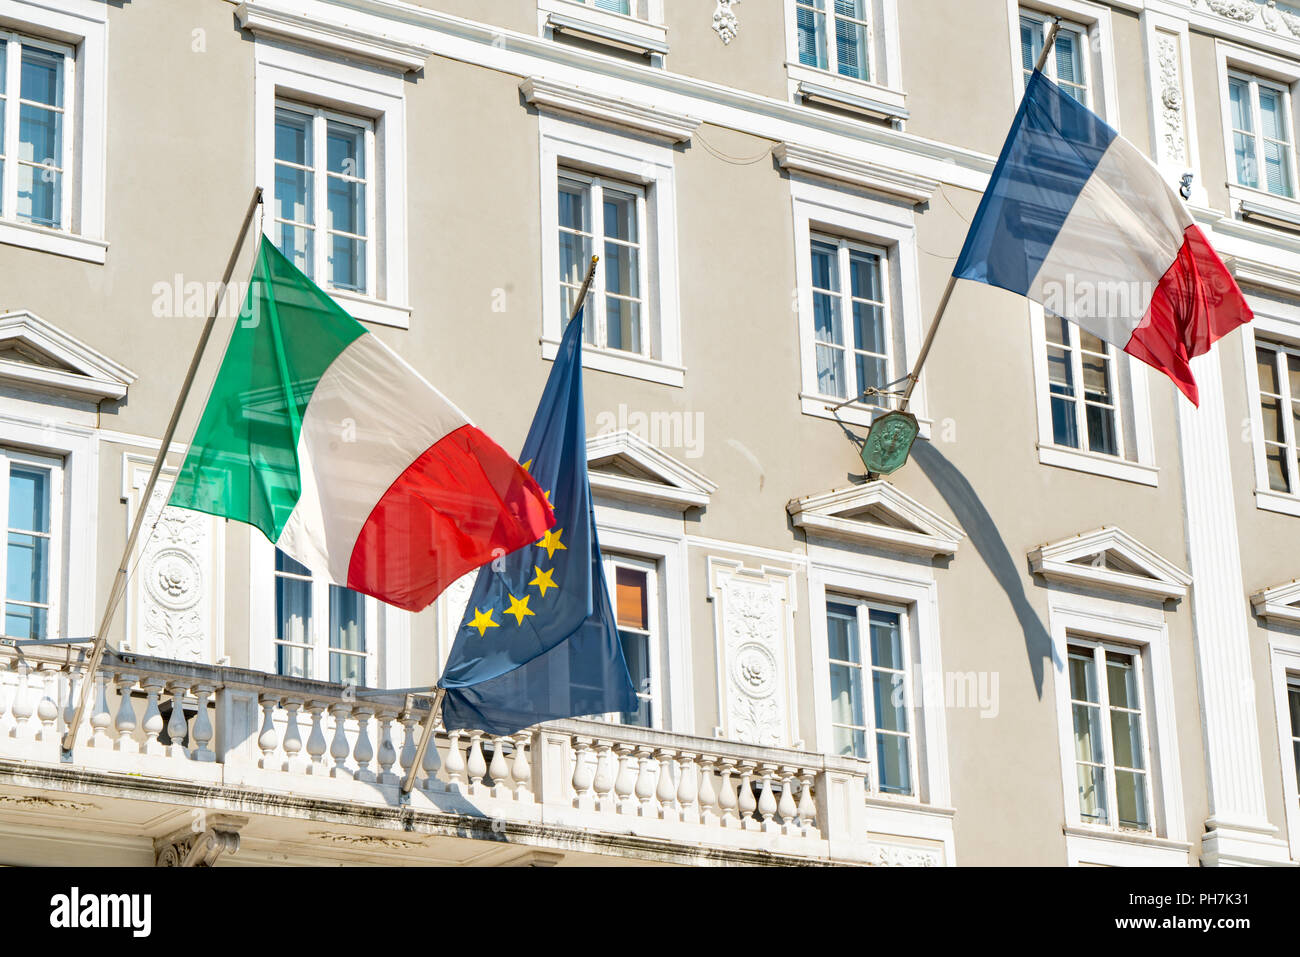 the concept of the recent political conflict between the President of the French Republic Emmanuel Macron and the Italian Vice Premier Matteo Salvini on the problems of immigration and the refugees. Image taken on the facade of the building housing the French consulate in Trieste, Italy Stock Photo